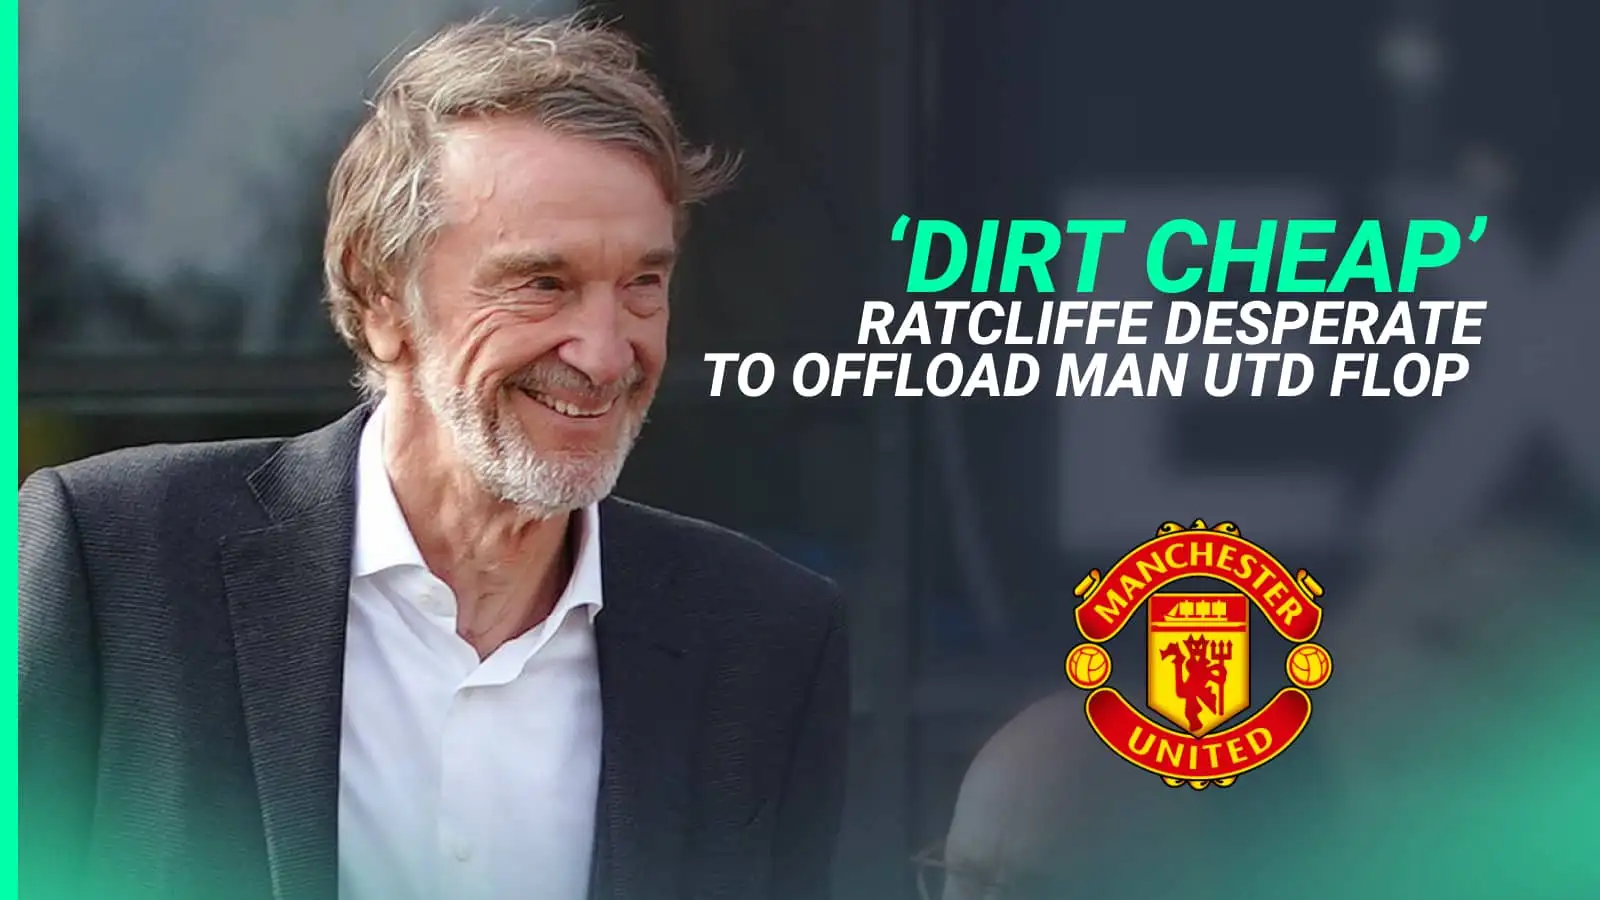 Sir Jim Ratcliffe is on a mission to offload the unwanted players at Manchester United